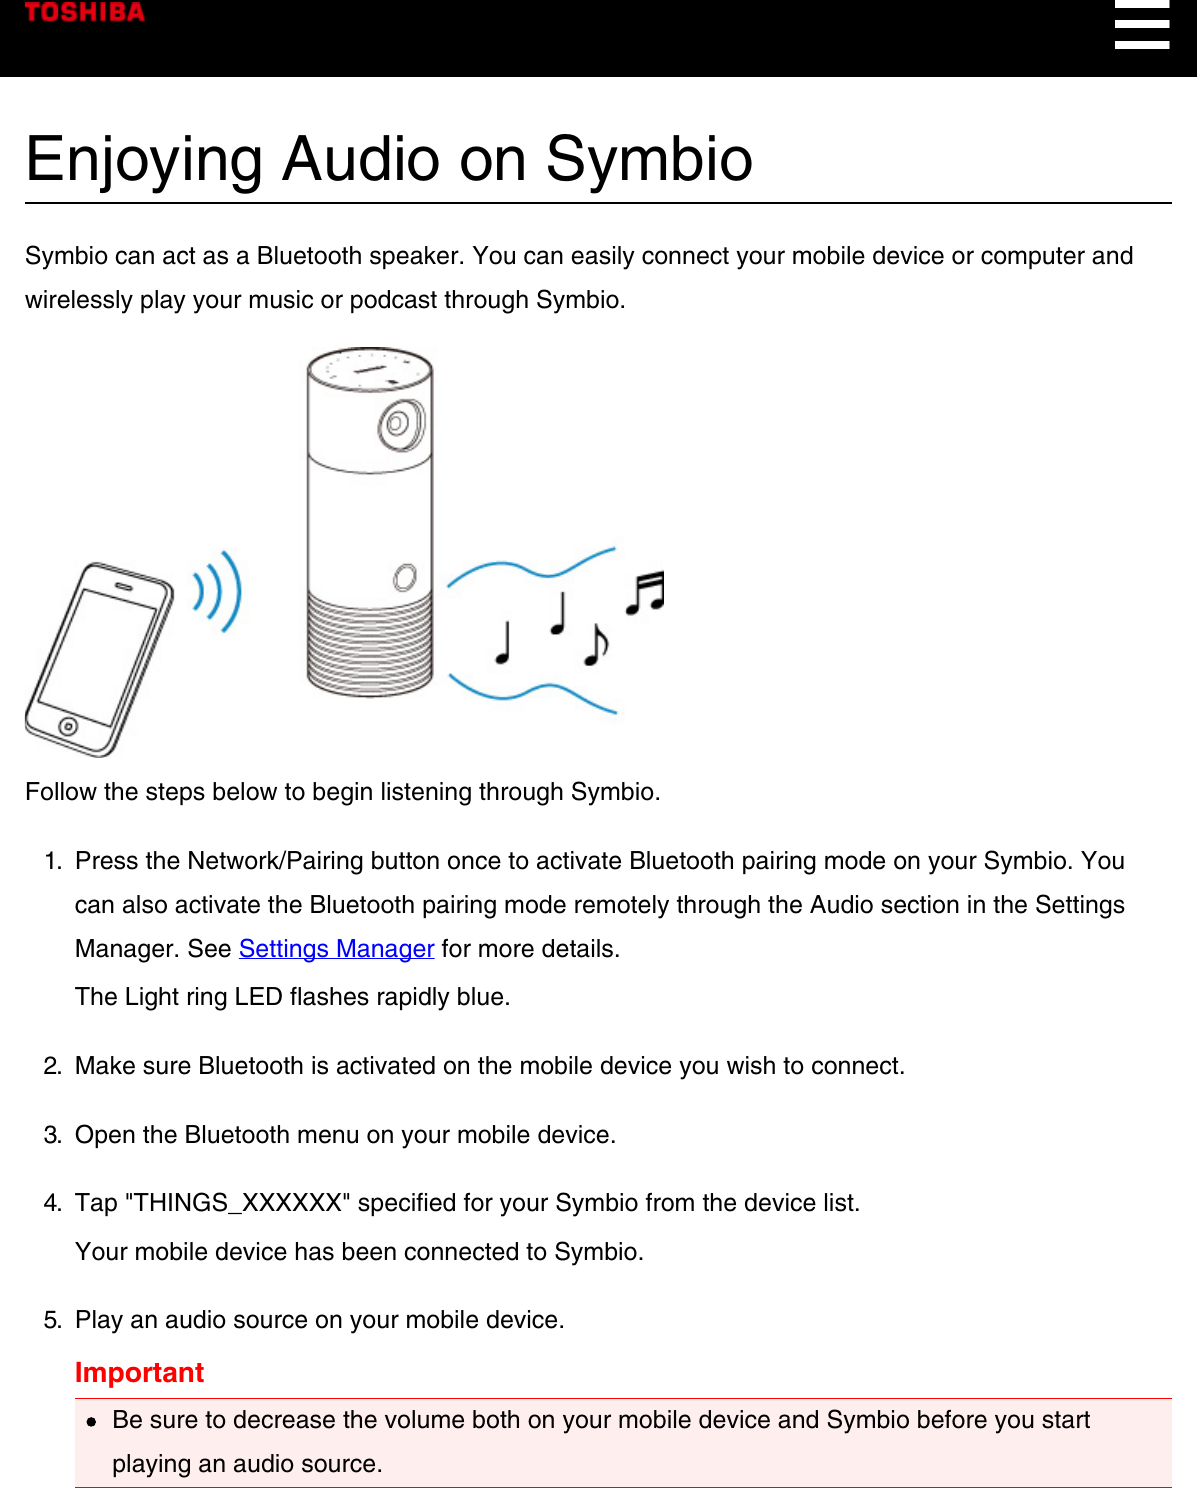 Enjoying Audio on SymbioSymbio can act as a Bluetooth speaker. You can easily connect your mobile device or computer andwirelessly play your music or podcast through Symbio.Follow the steps below to begin listening through Symbio.1.  Press the Network/Pairing button once to activate Bluetooth pairing mode on your Symbio. Youcan also activate the Bluetooth pairing mode remotely through the Audio section in the SettingsManager. See Settings Manager for more details.The Light ring LED flashes rapidly blue.2.  Make sure Bluetooth is activated on the mobile device you wish to connect.3.  Open the Bluetooth menu on your mobile device.4.  Tap &quot;THINGS_XXXXXX&quot; specified for your Symbio from the device list.Your mobile device has been connected to Symbio.5.  Play an audio source on your mobile device.ImportantBe sure to decrease the volume both on your mobile device and Symbio before you startplaying an audio source.